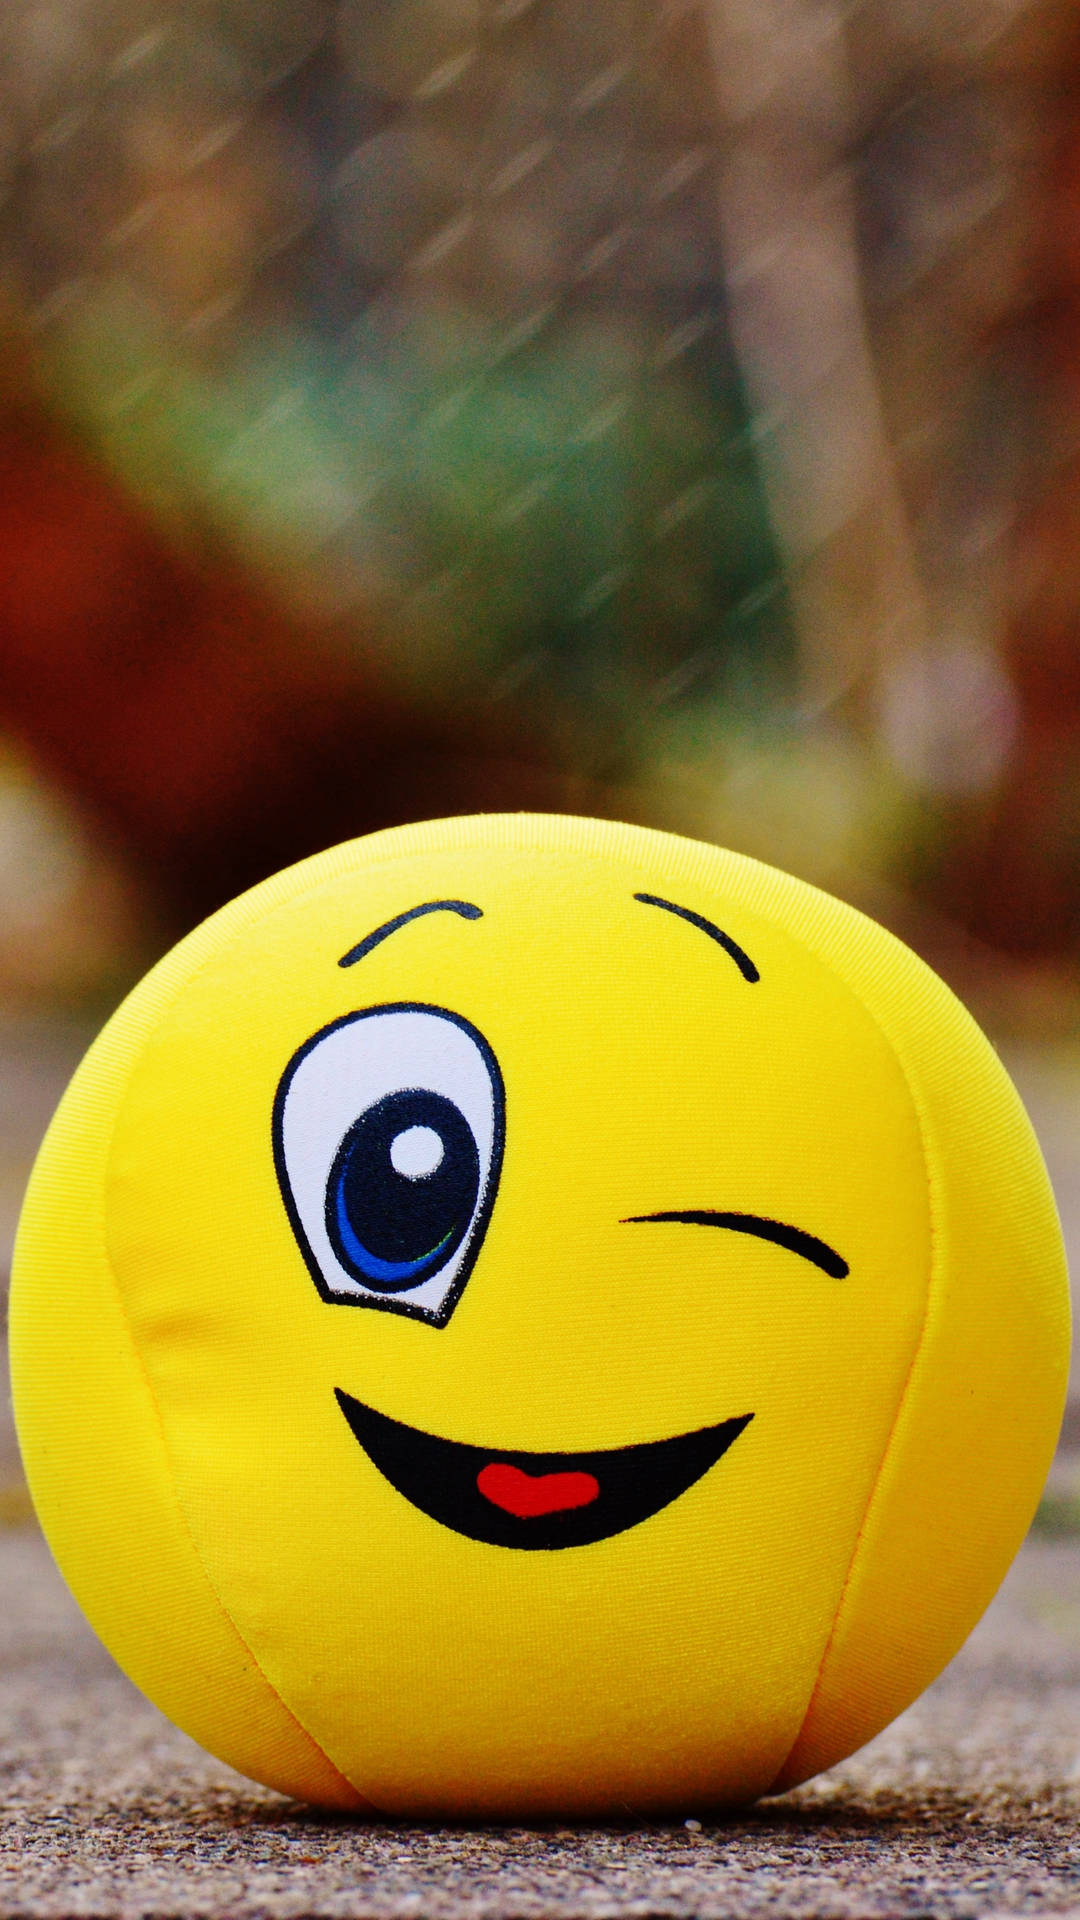 Winking Smiley Face Ball Cushion Background